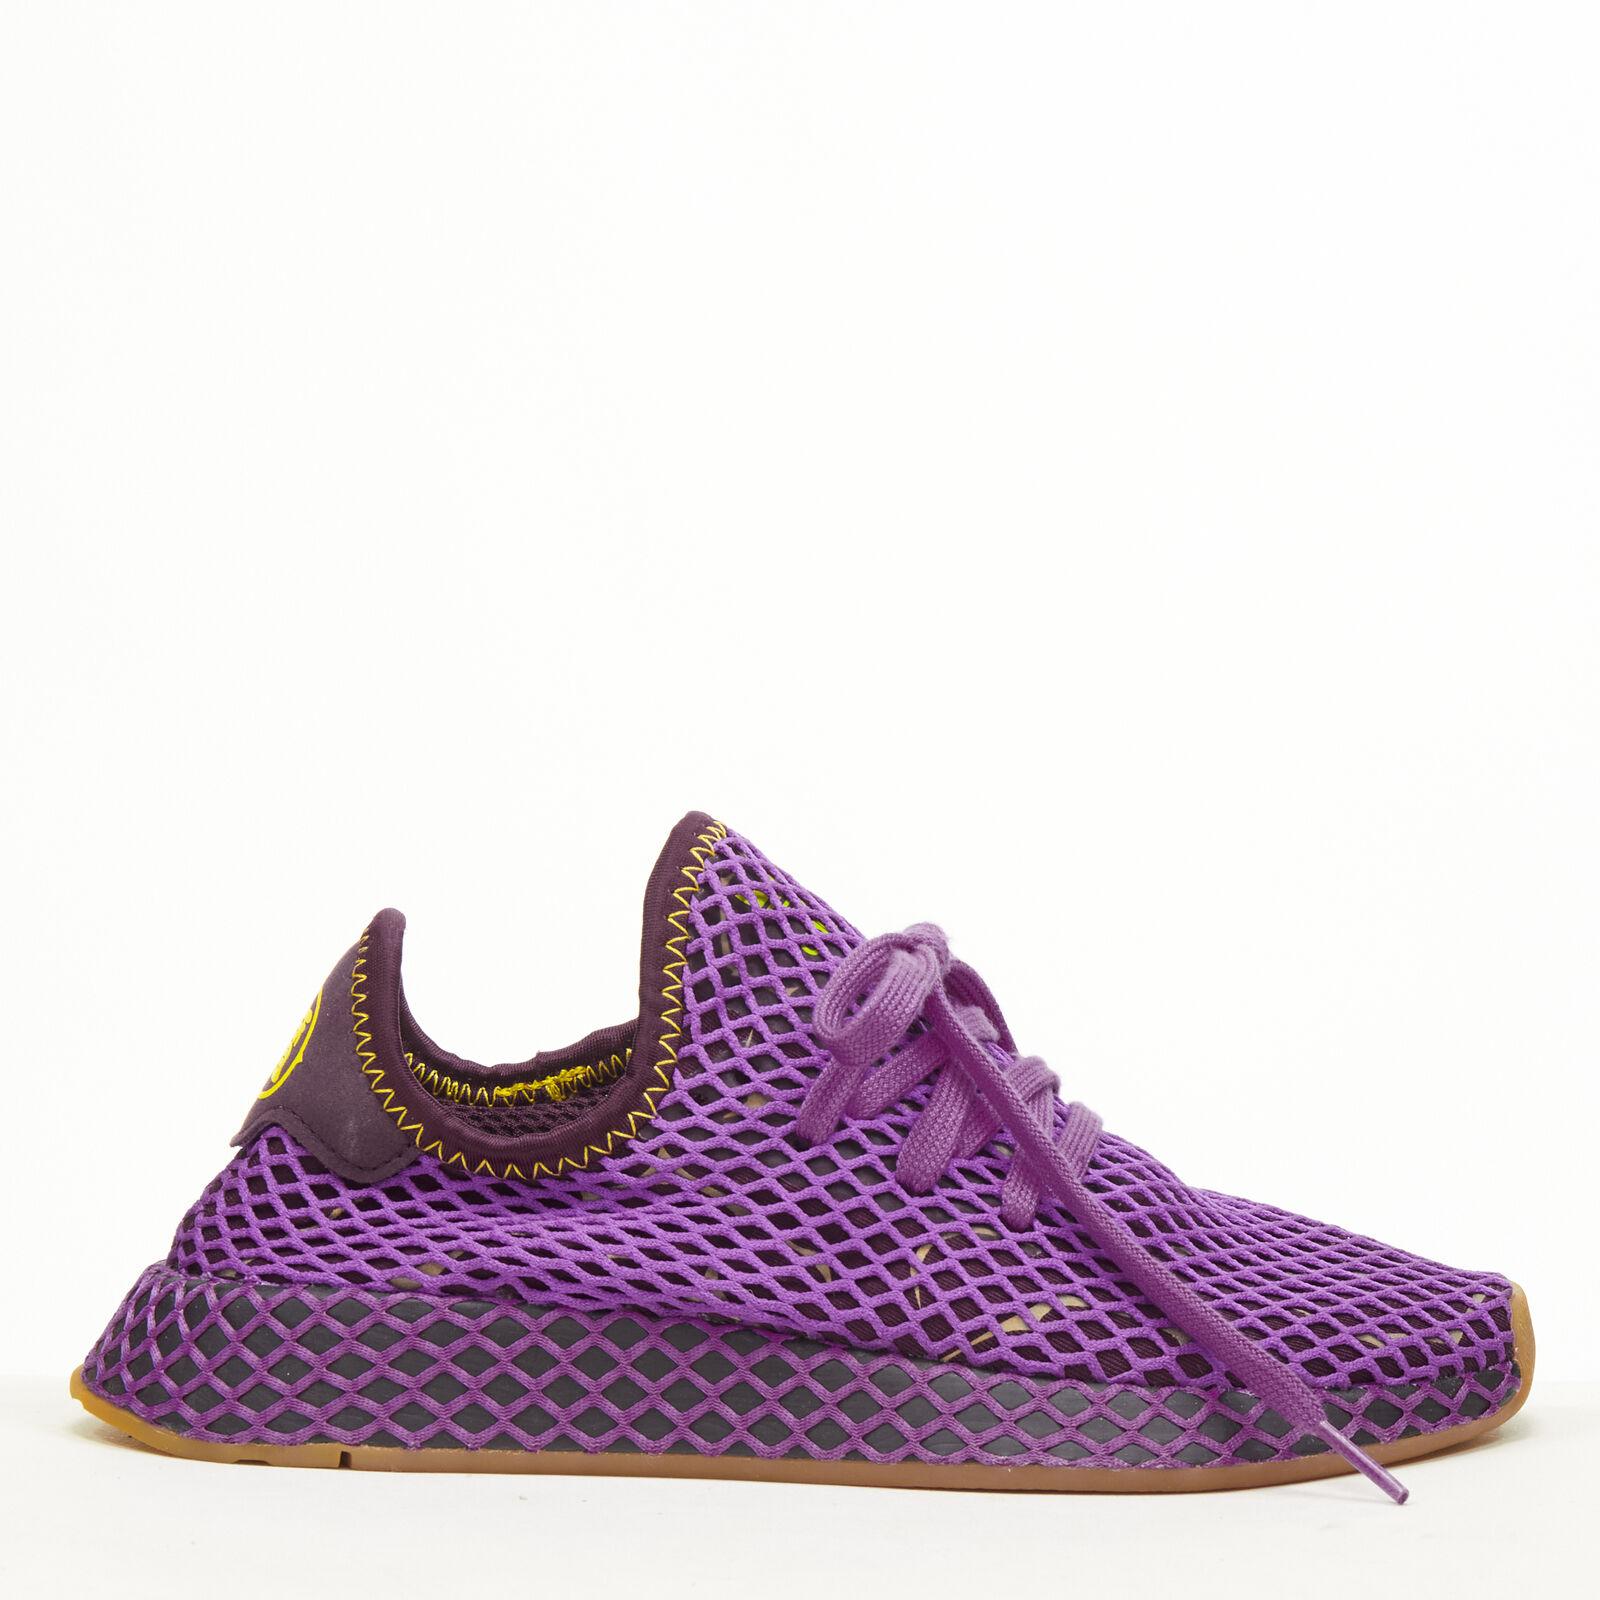 ADIDAS Dragon Ball Z 2018 Son Gohan Deerupt Cell Saga Pack sneakers US4.5 EU36.5
Reference: ANWU/A00834
Brand: Adidas
Model: Deerupt Cell Saga Pack
Collection: Dragon Ball Z 2018 Son Gohan
Material: Fabric
Color: Purple
Pattern: Abstract
Closure: